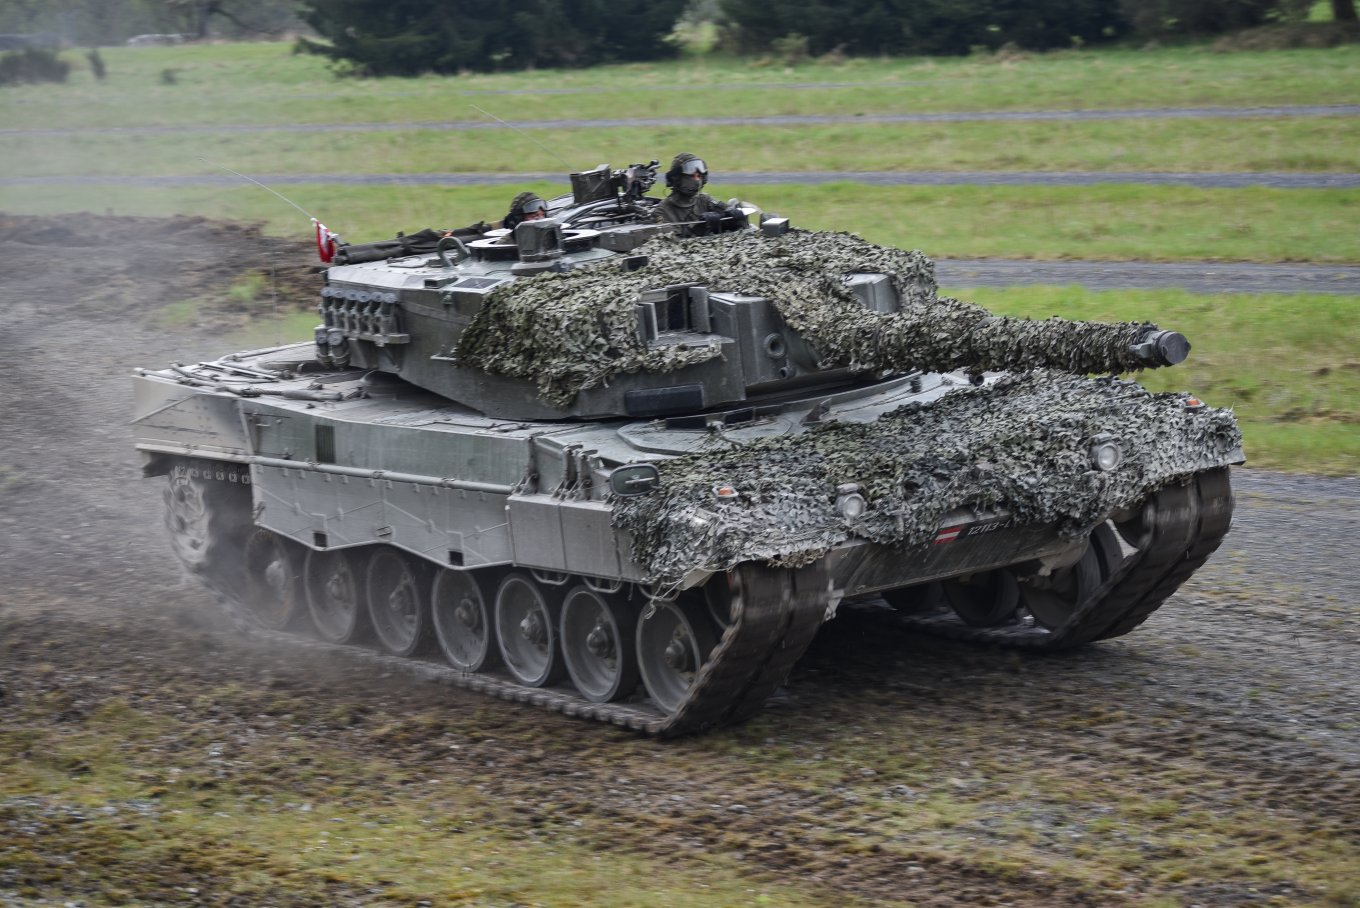 Spain’s Leopard 2 Were Stored In Poor Conditions, But the Country Will Do Everything to Supply Ukraine With Them As Soon As Possible, Defense Express, war in Ukraine, Russian-Ukrainian war